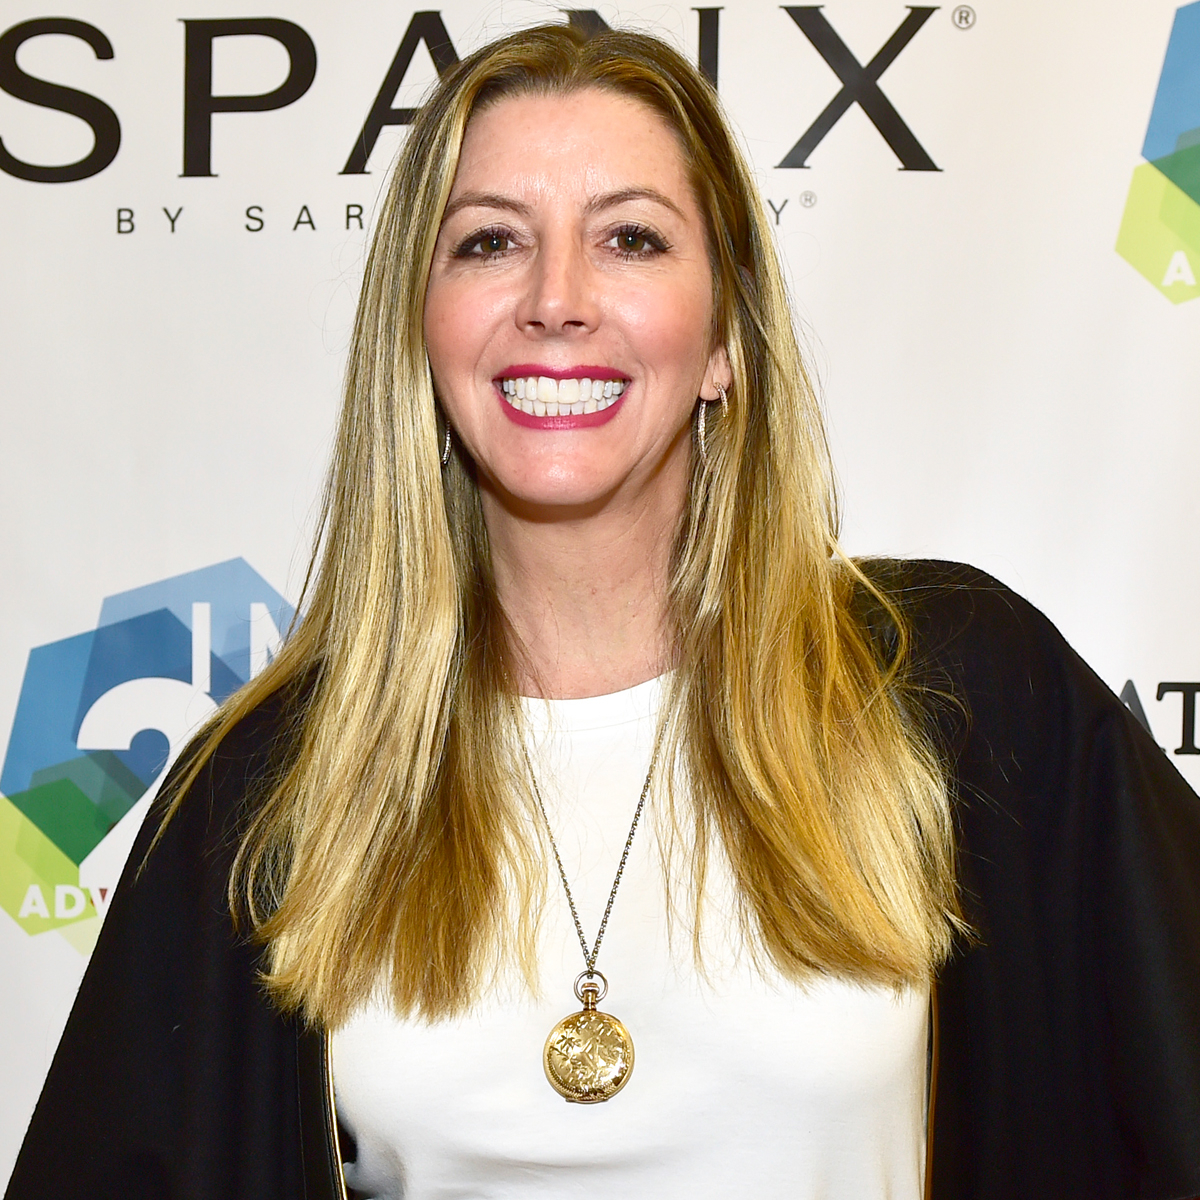 Business Story: How The Founder Of Spanx Became A Household Name